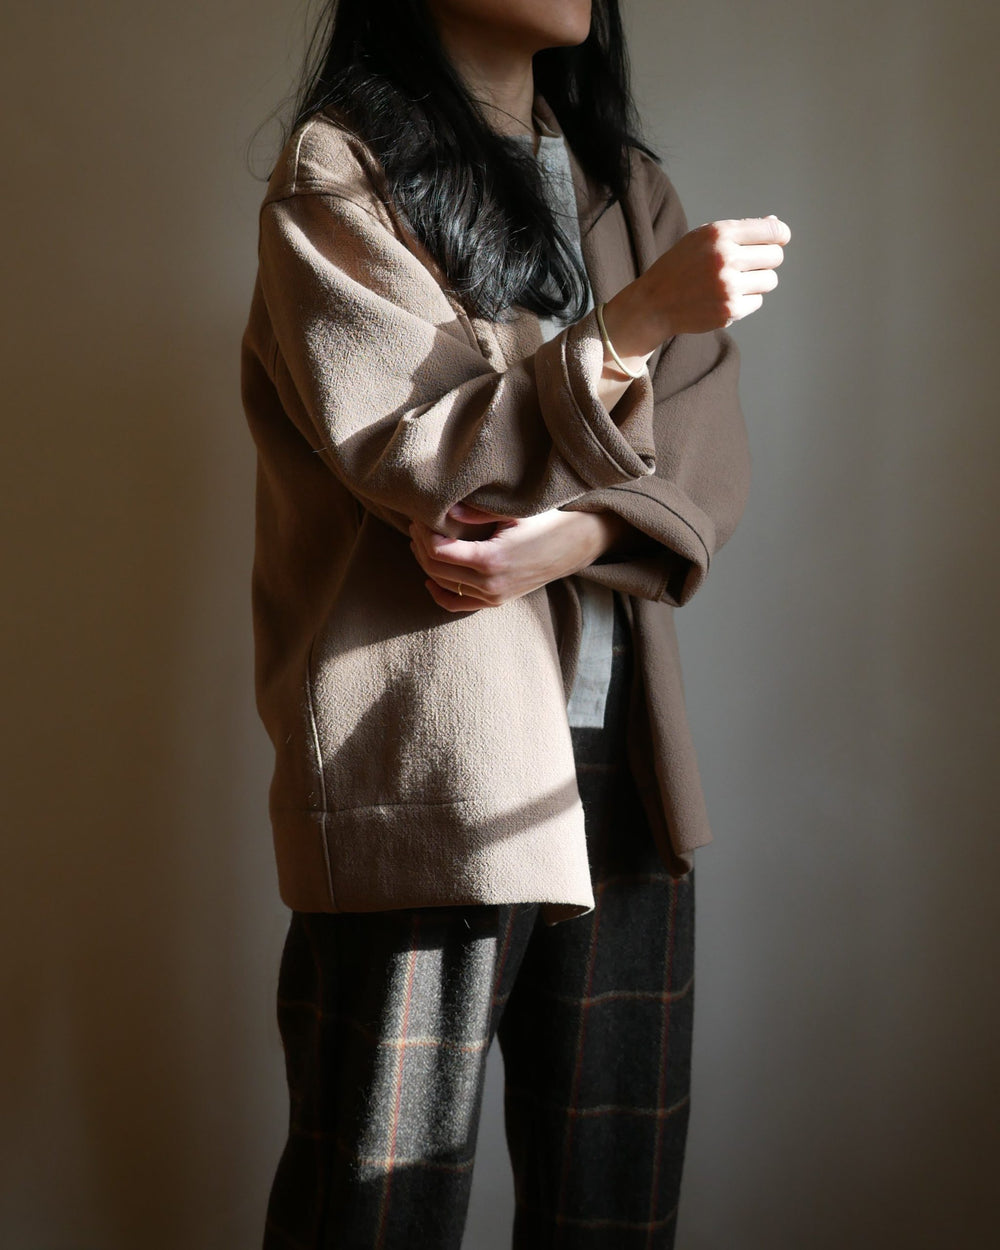 Woman wearing the Daphne Jacket sewing pattern from Vivian Shao Chen on The Fold Line. A jacket pattern made in wool coating, boiled wool, tweed, flannel, double-faced fabric, or quilted fabric, featuring a shawl collar, open front, oversized and boxy fit